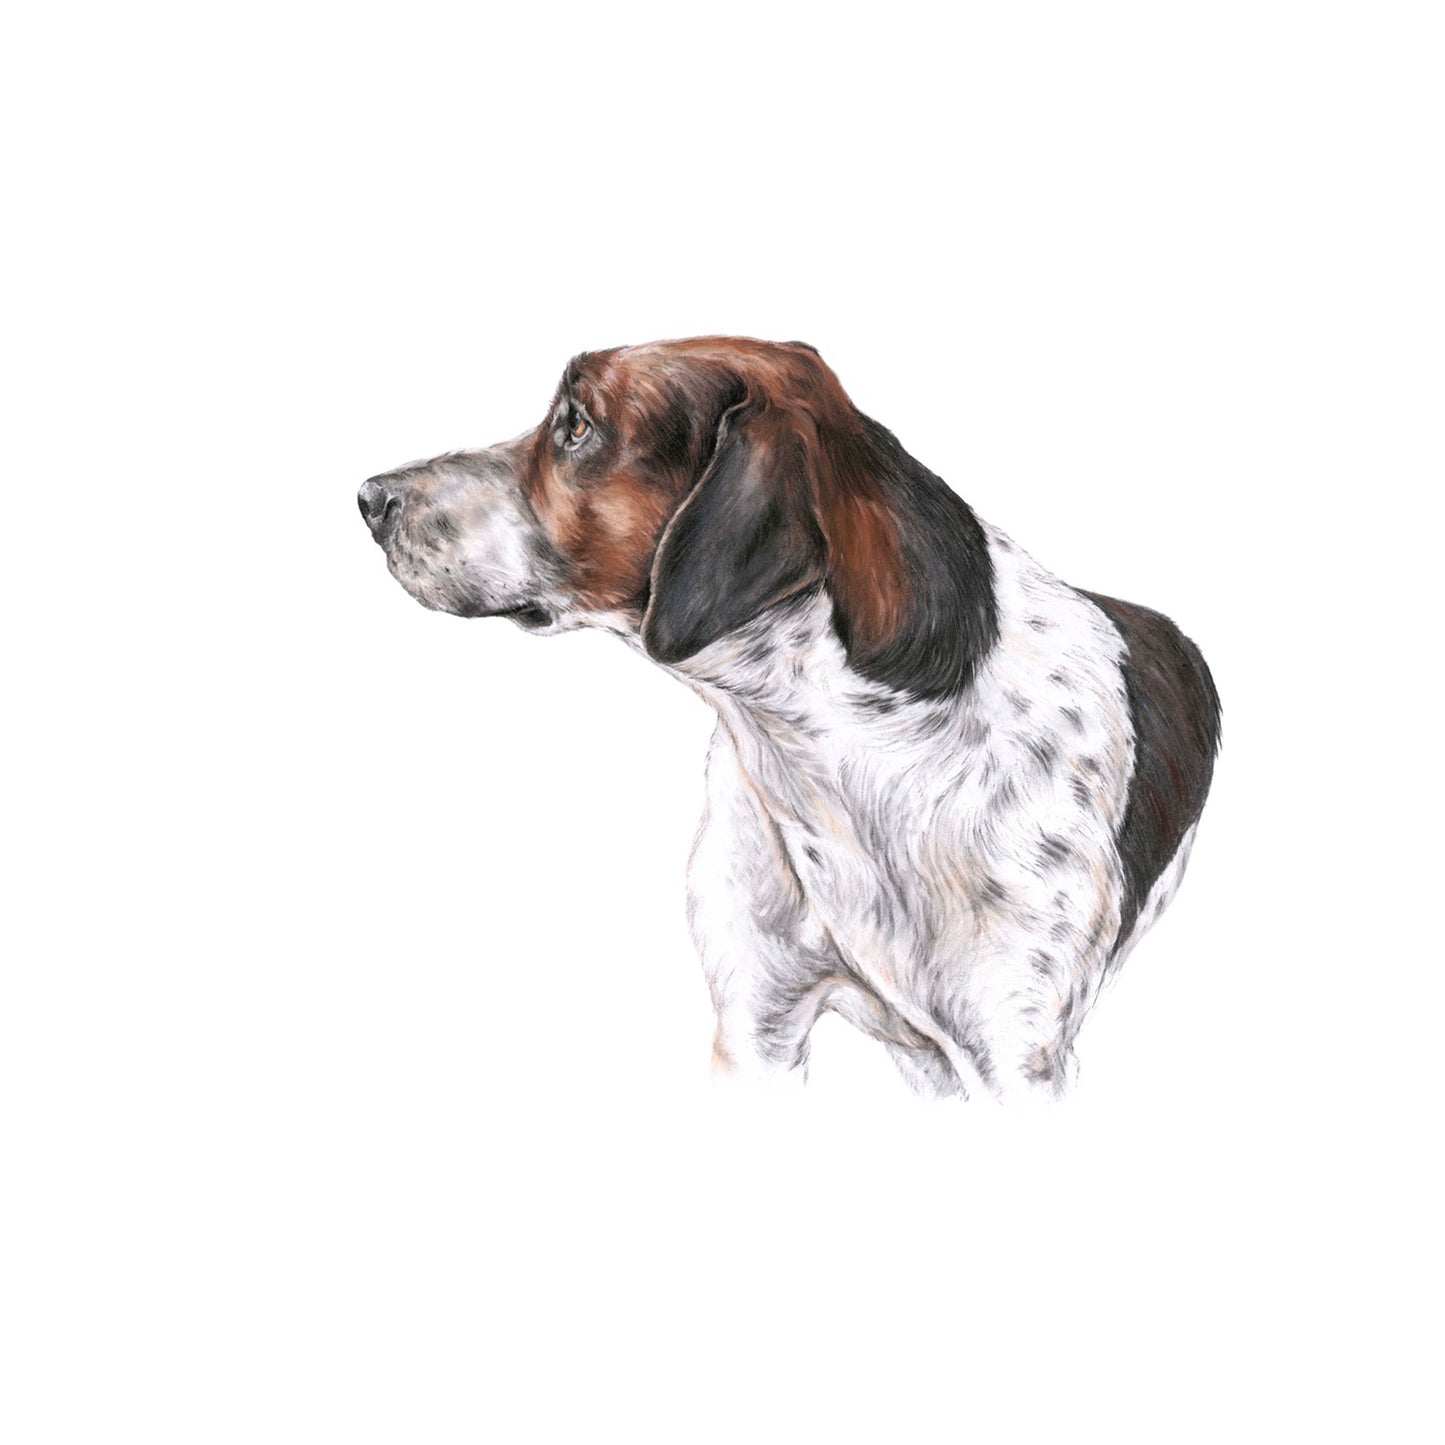 "Hound 1" Signed Limited Edition Giclée Print